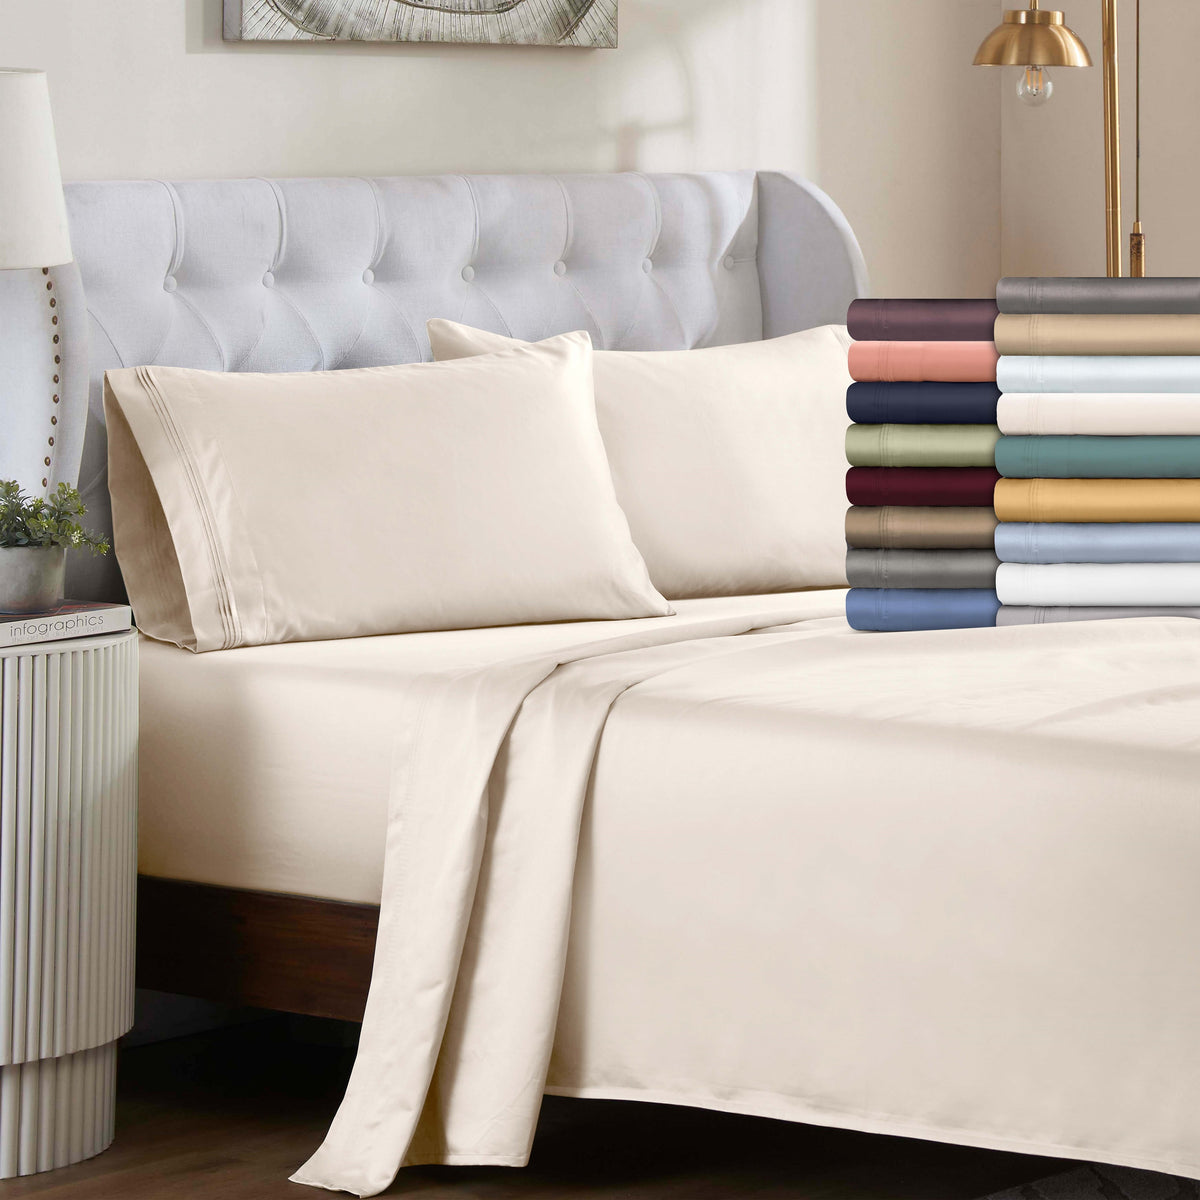 Egyptian Cotton 1000 Thread Count Eco-Friendly Solid Sheet Set